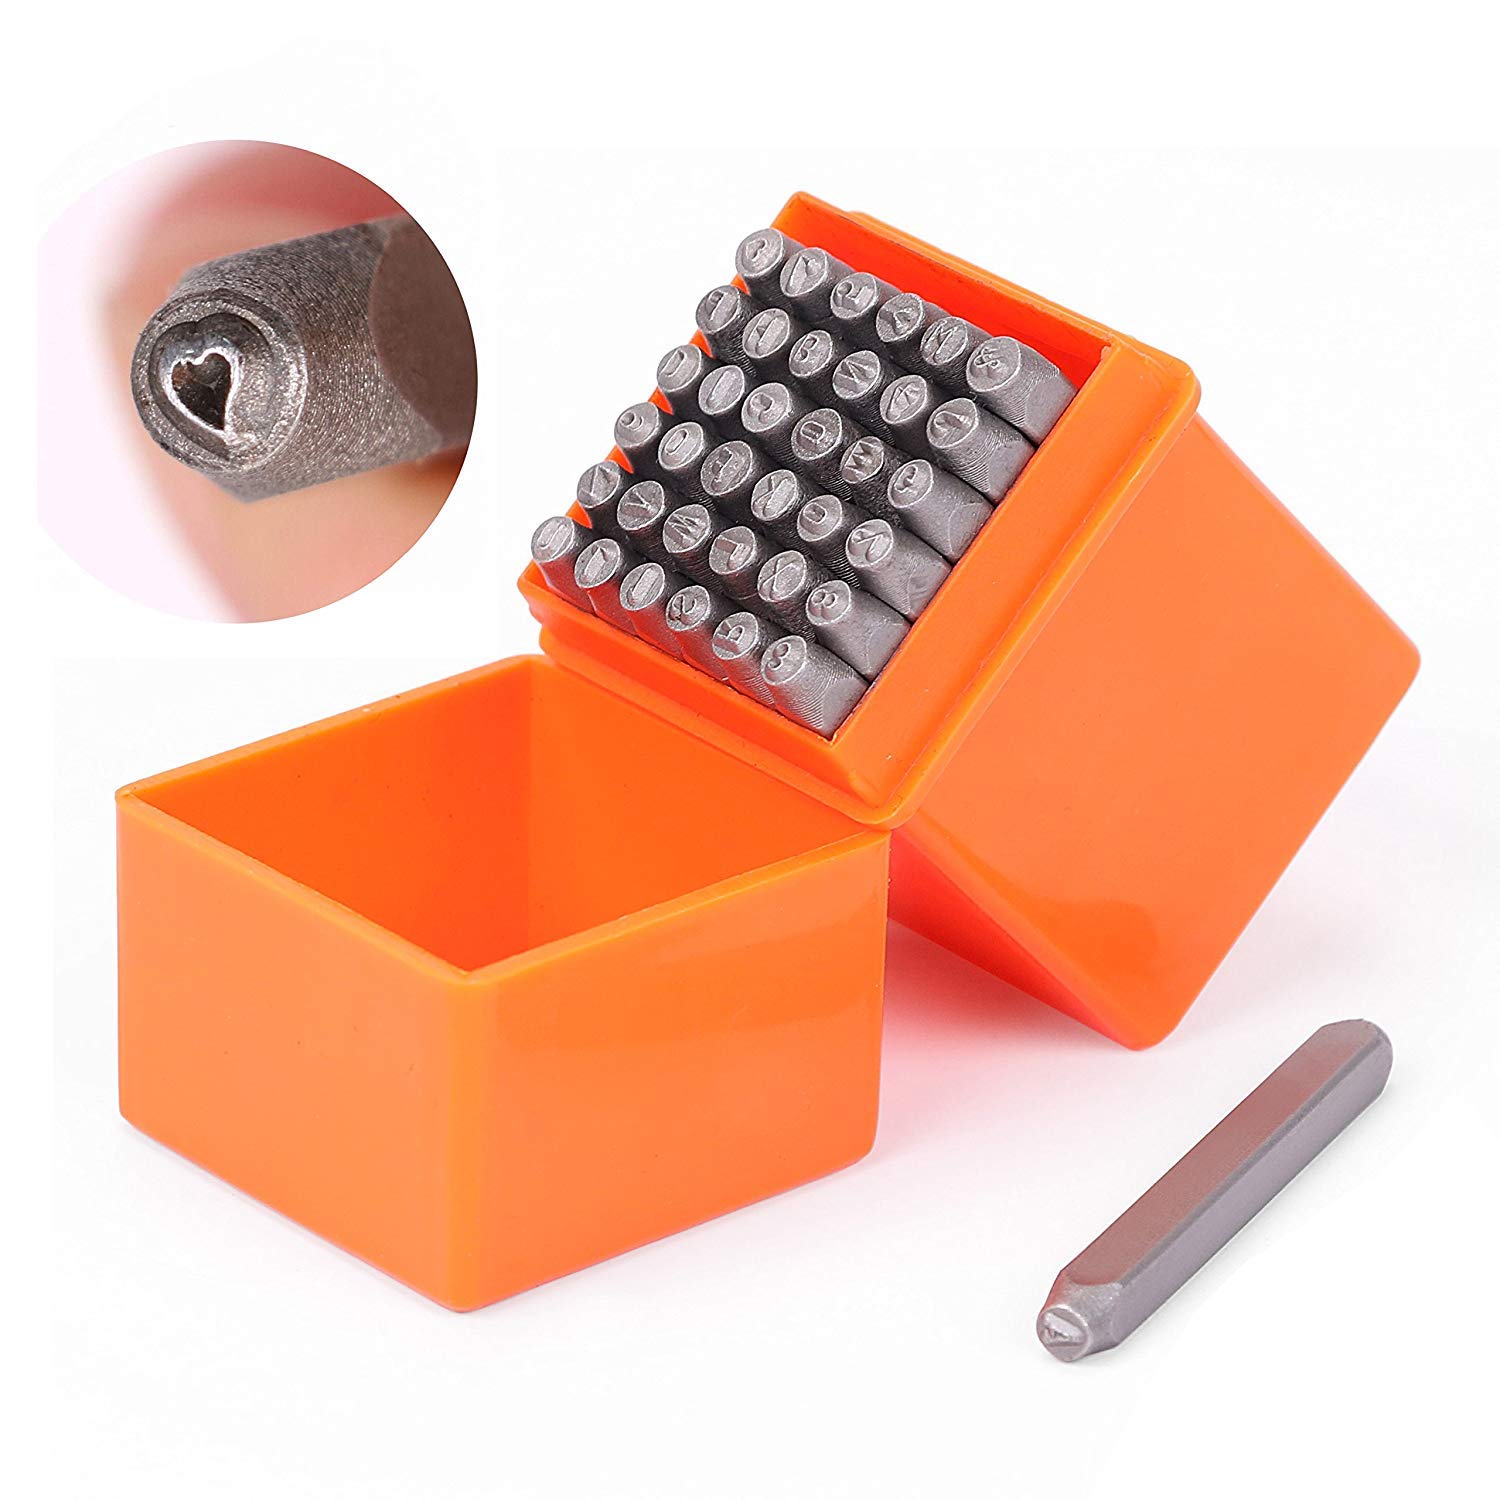 HORUSDY 37-Piece Number and Letter Stamp Set 1/8 (3mm) (A-Z & 0-9 + Love) Punch Perfect for Imprinting Metal, Plastic, Wood, Leather. - $5 (Possibly Targeted Coupon)